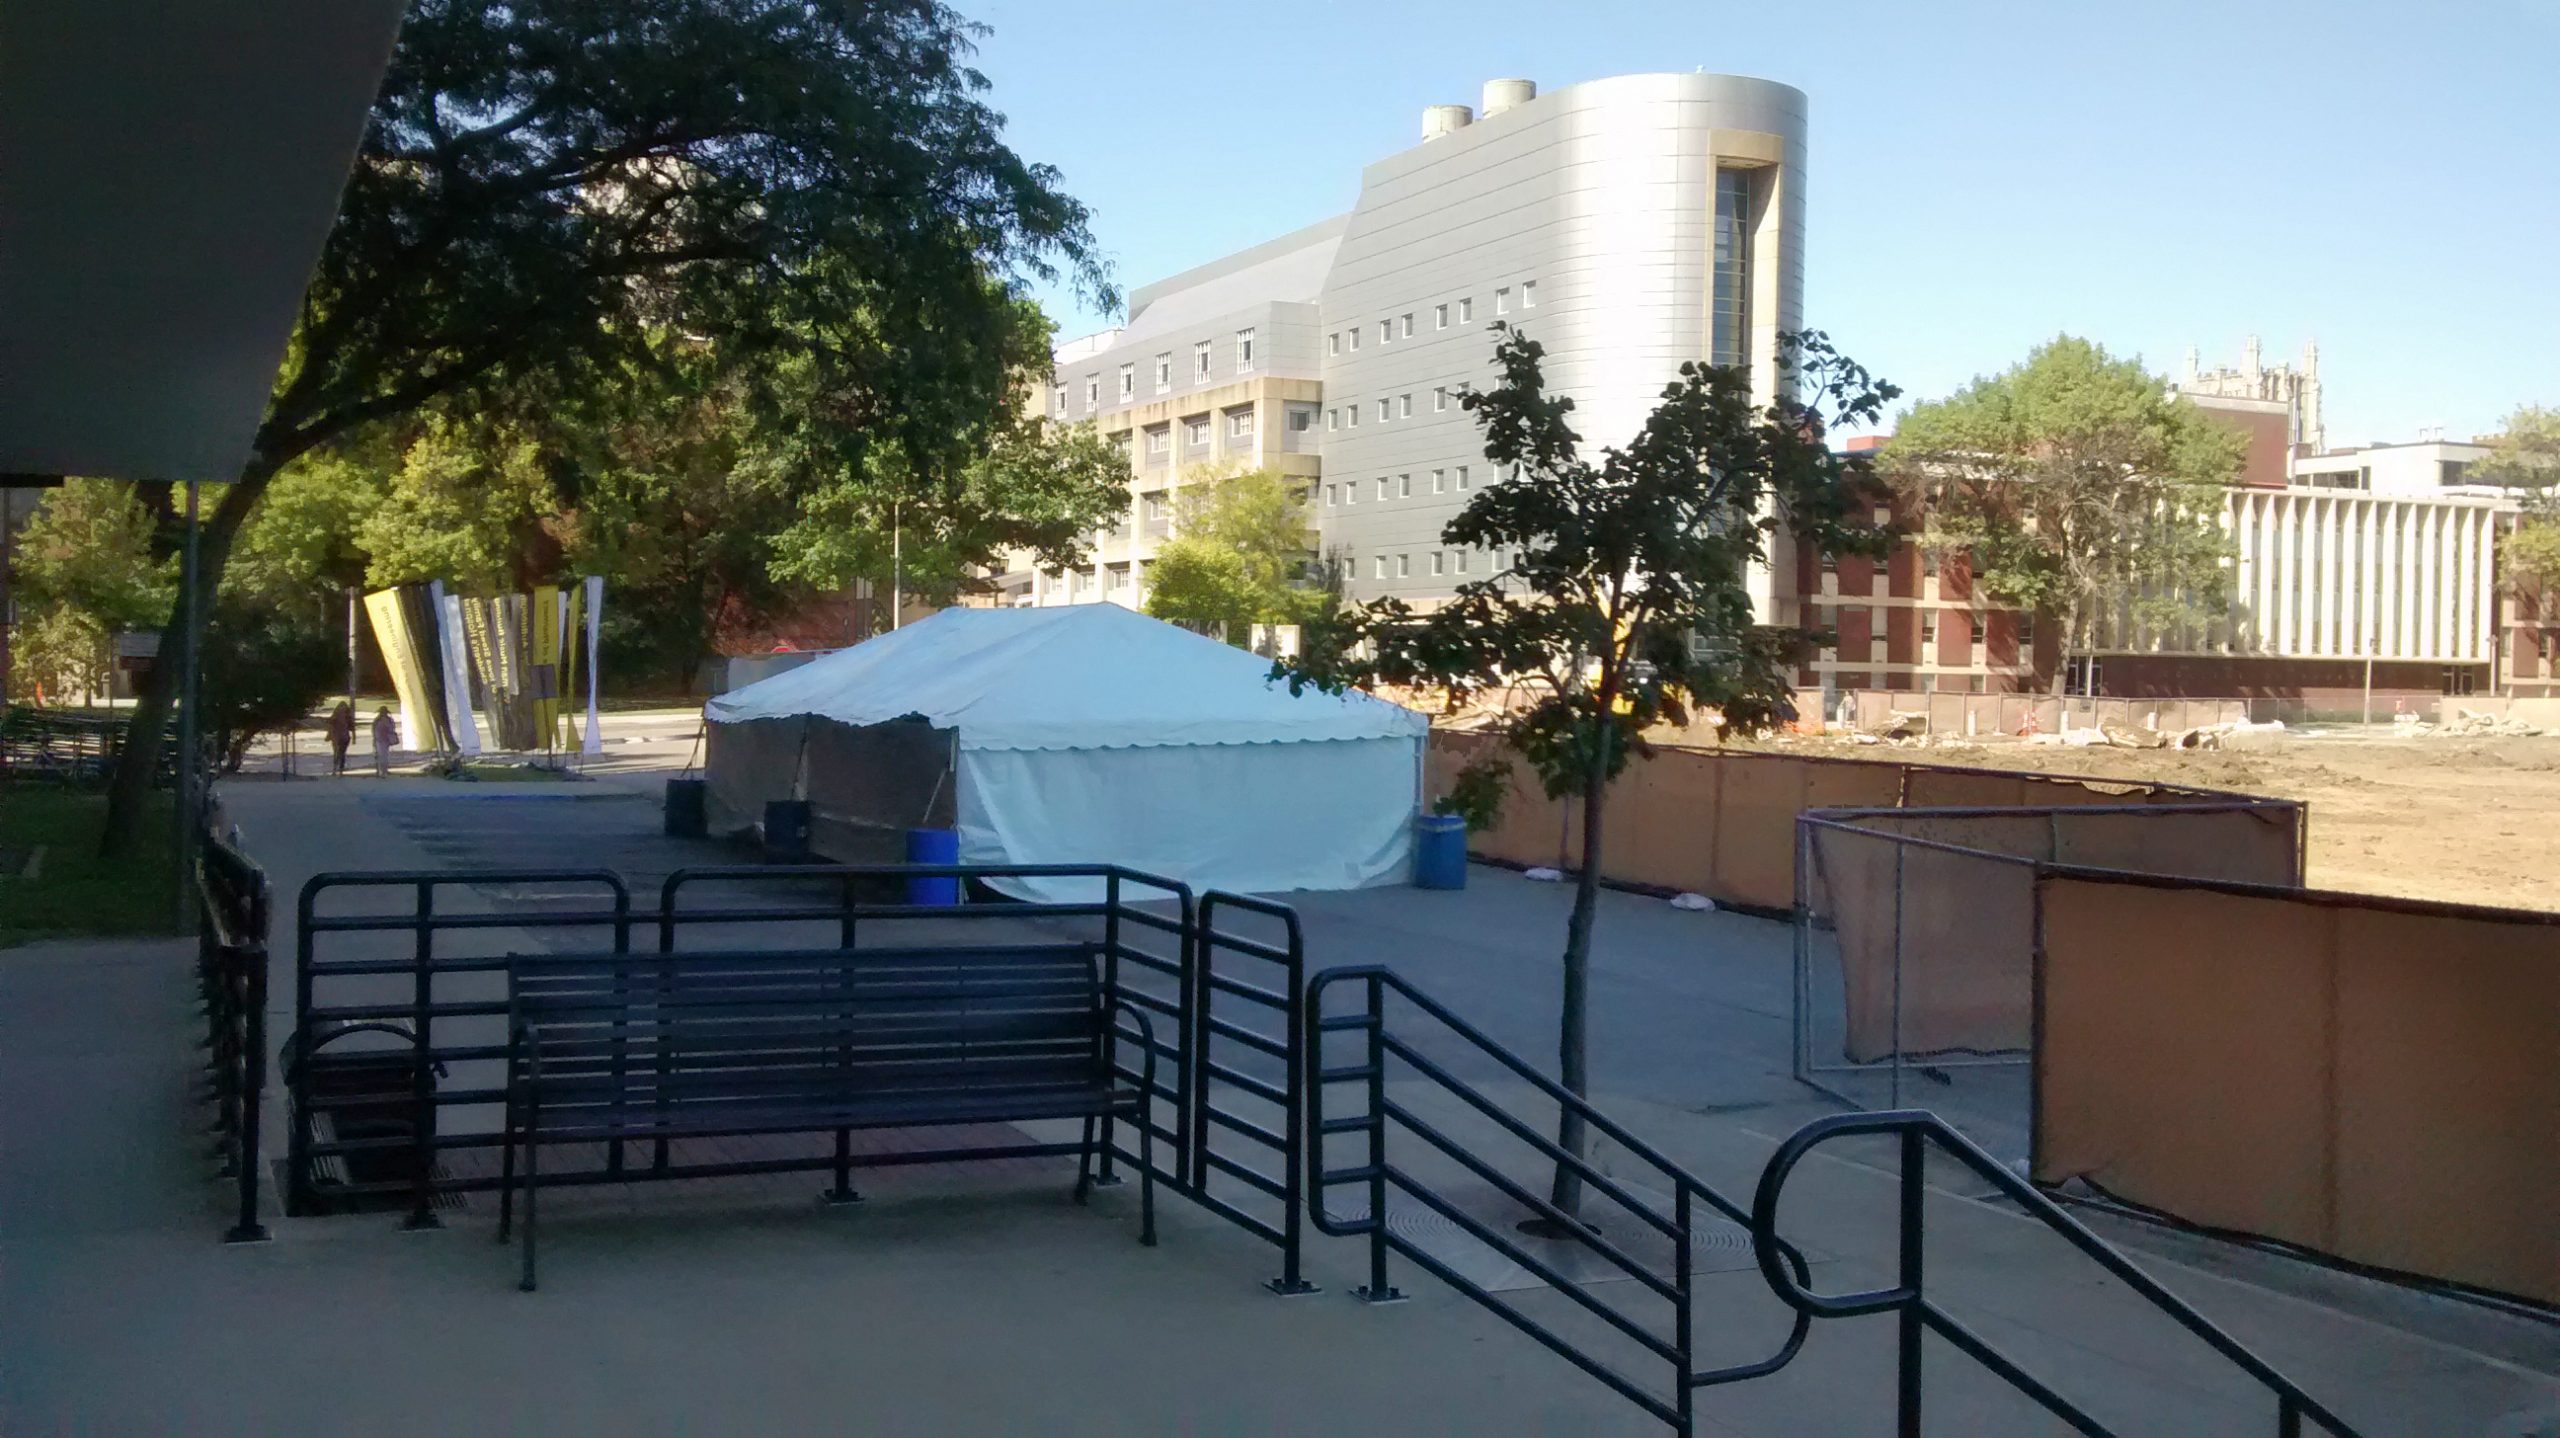 University of Iowa had us set up a 20' x 40' frame tent with water barrels between Rienow Hall and Quadrangle Hall in Iowa City